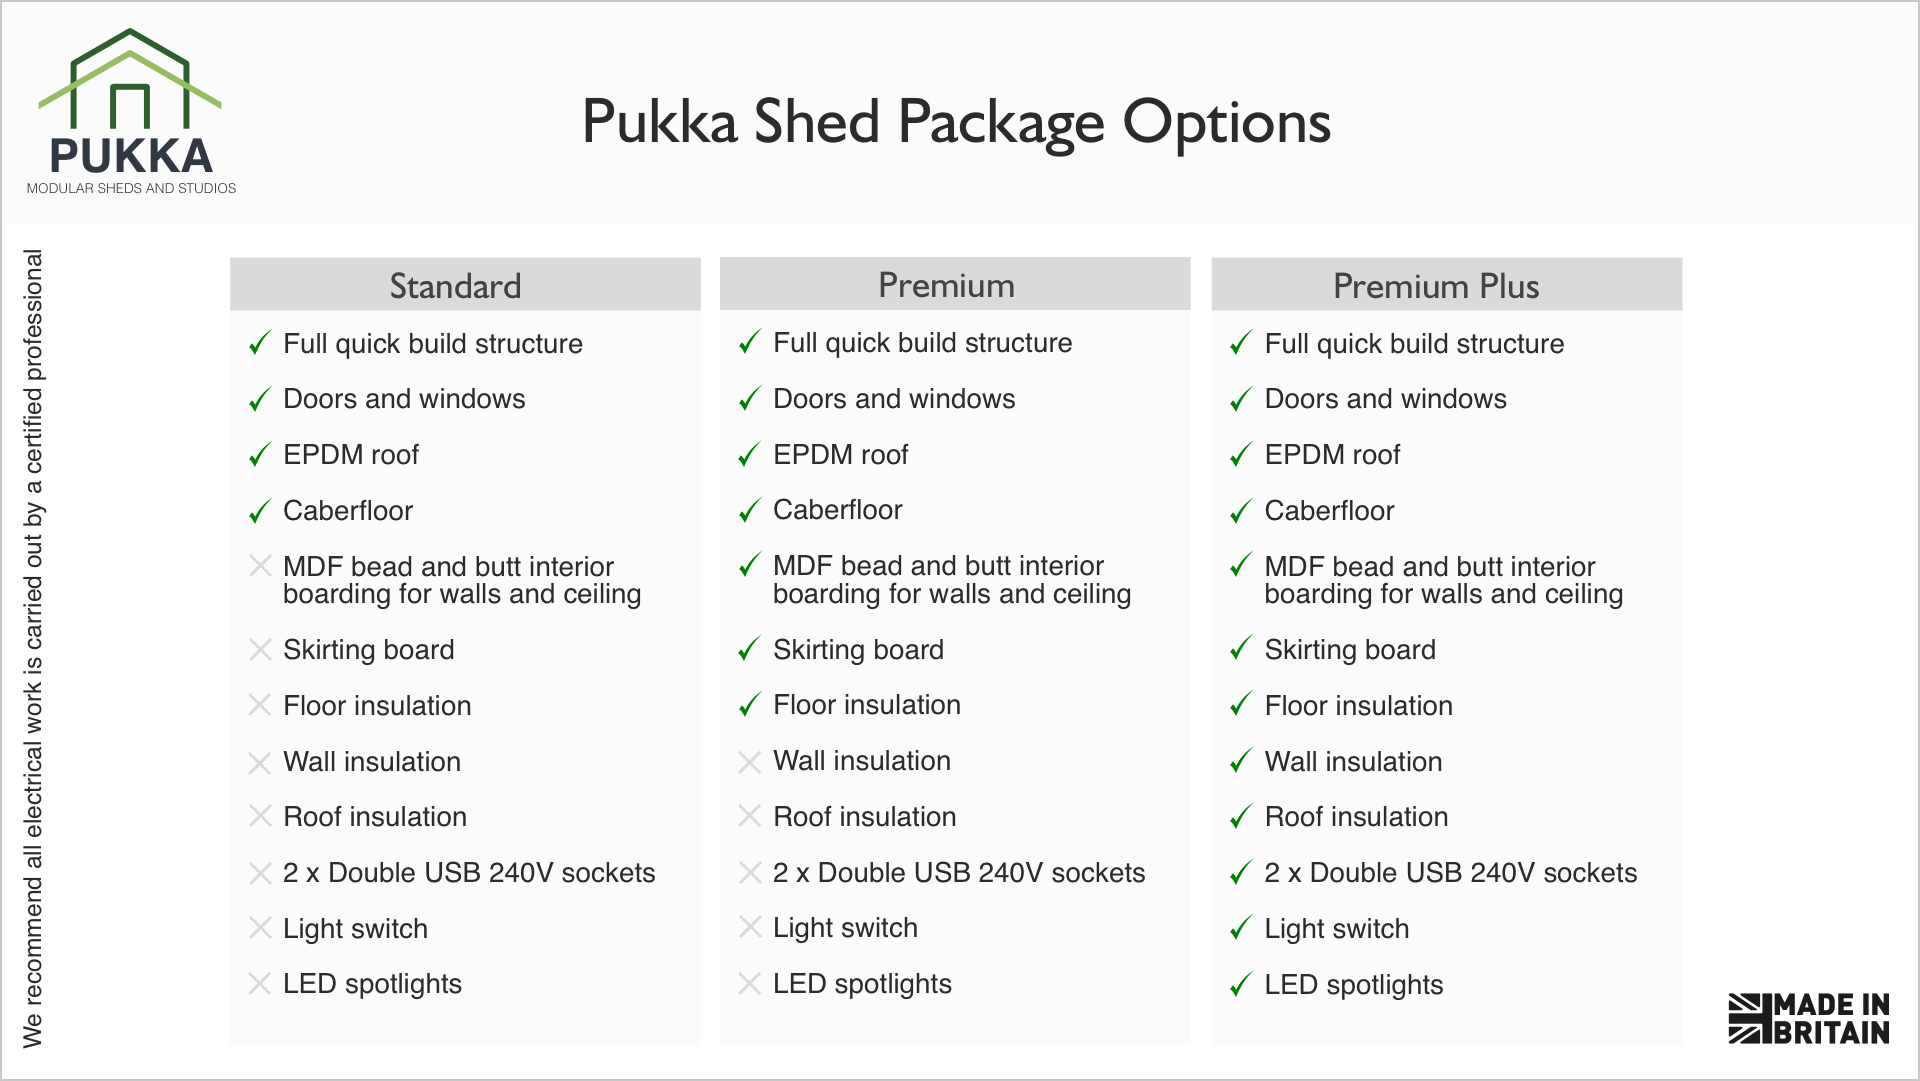 pukka shed package options